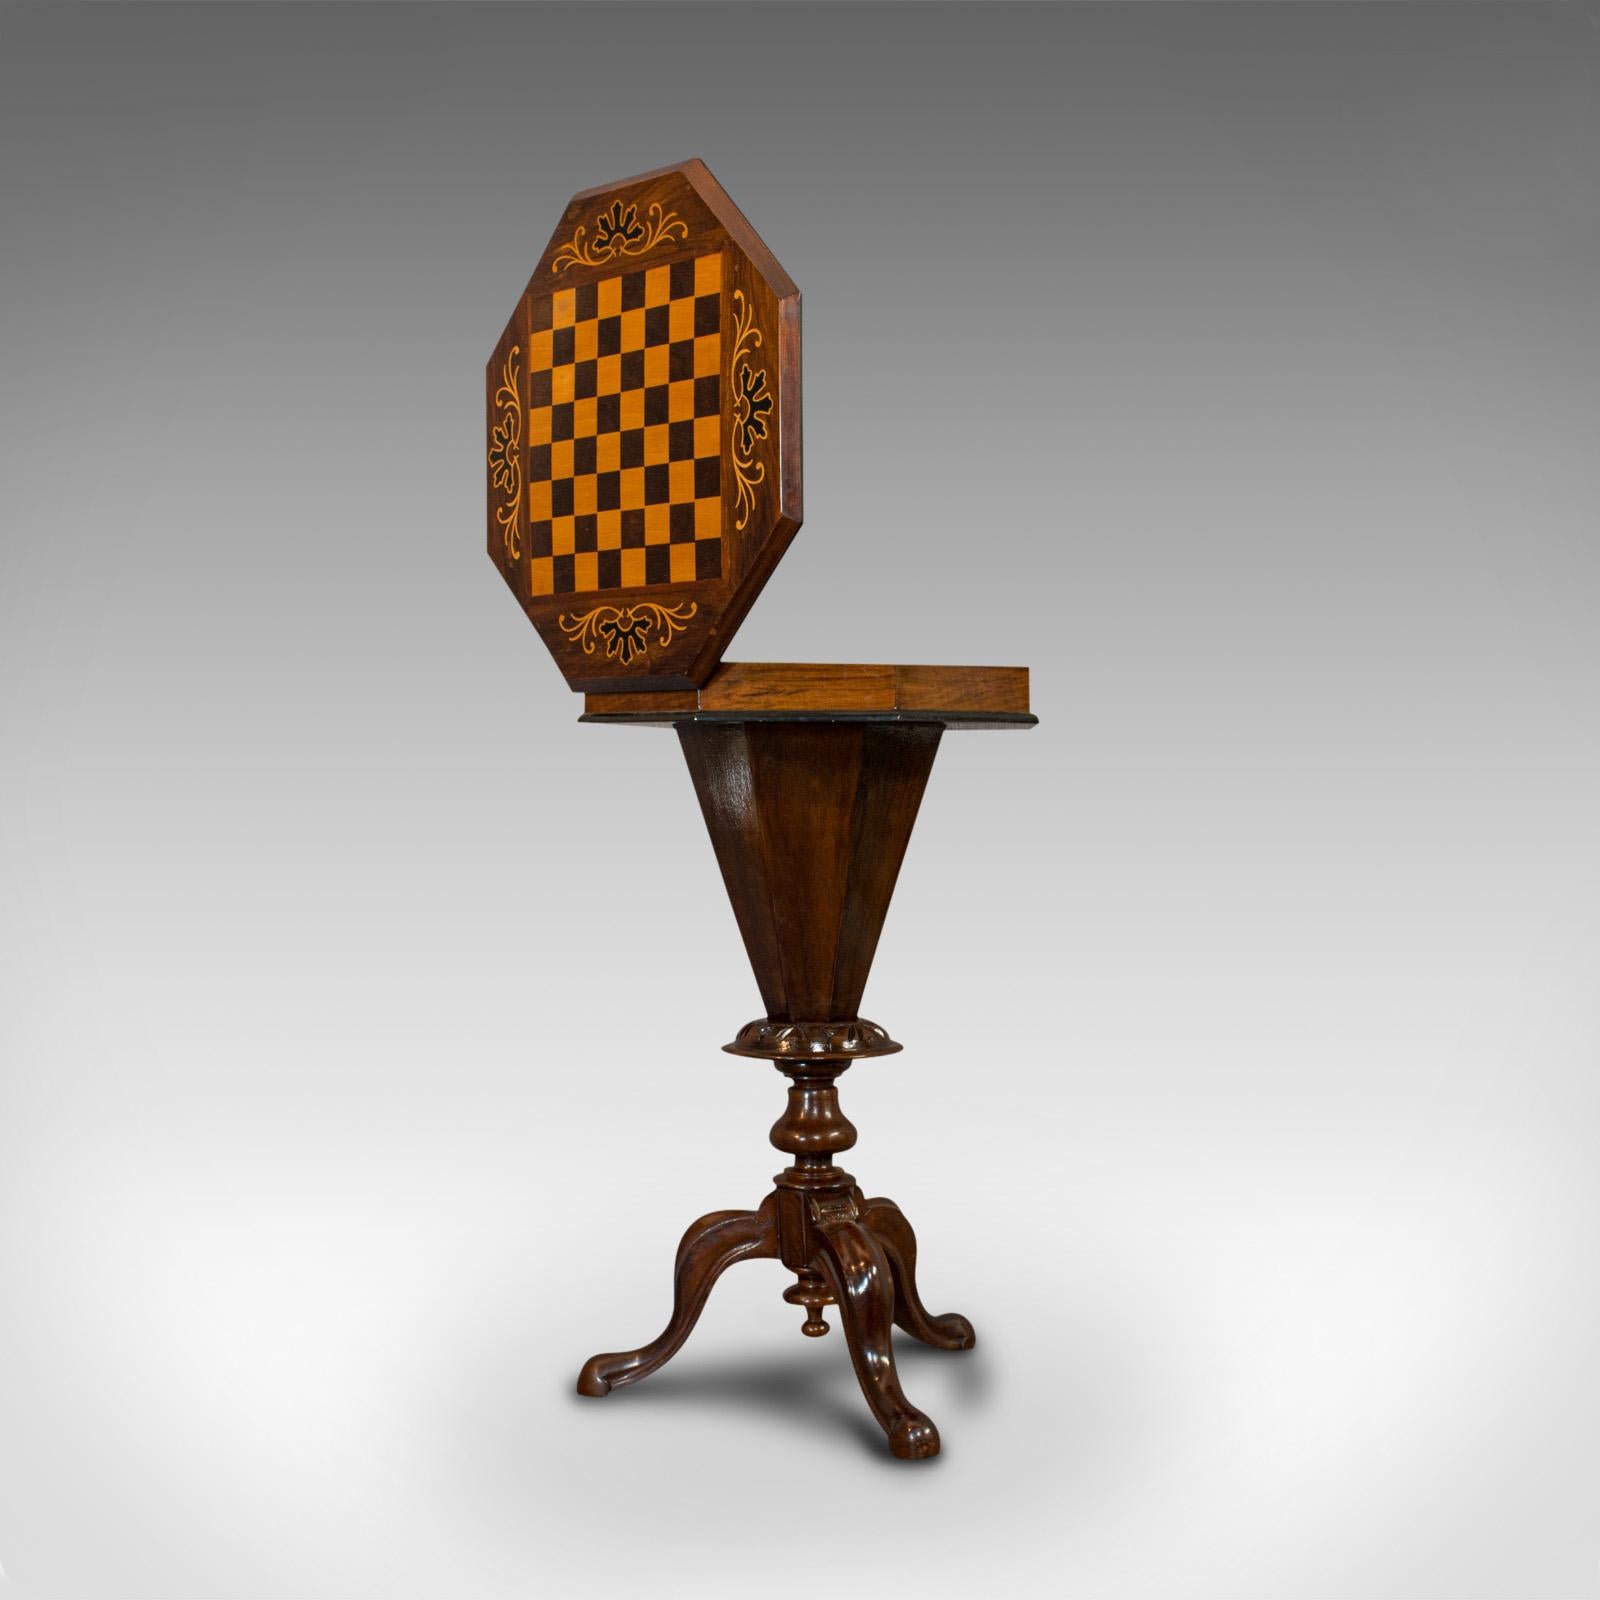 This is an antique trumpet shaped games table. An English, walnut chess board or sewing table, dating to the Victorian period, circa 1890.

Fascinating trumpet form
Displays a desirable aged patina
Select walnut shows fine grain interest and